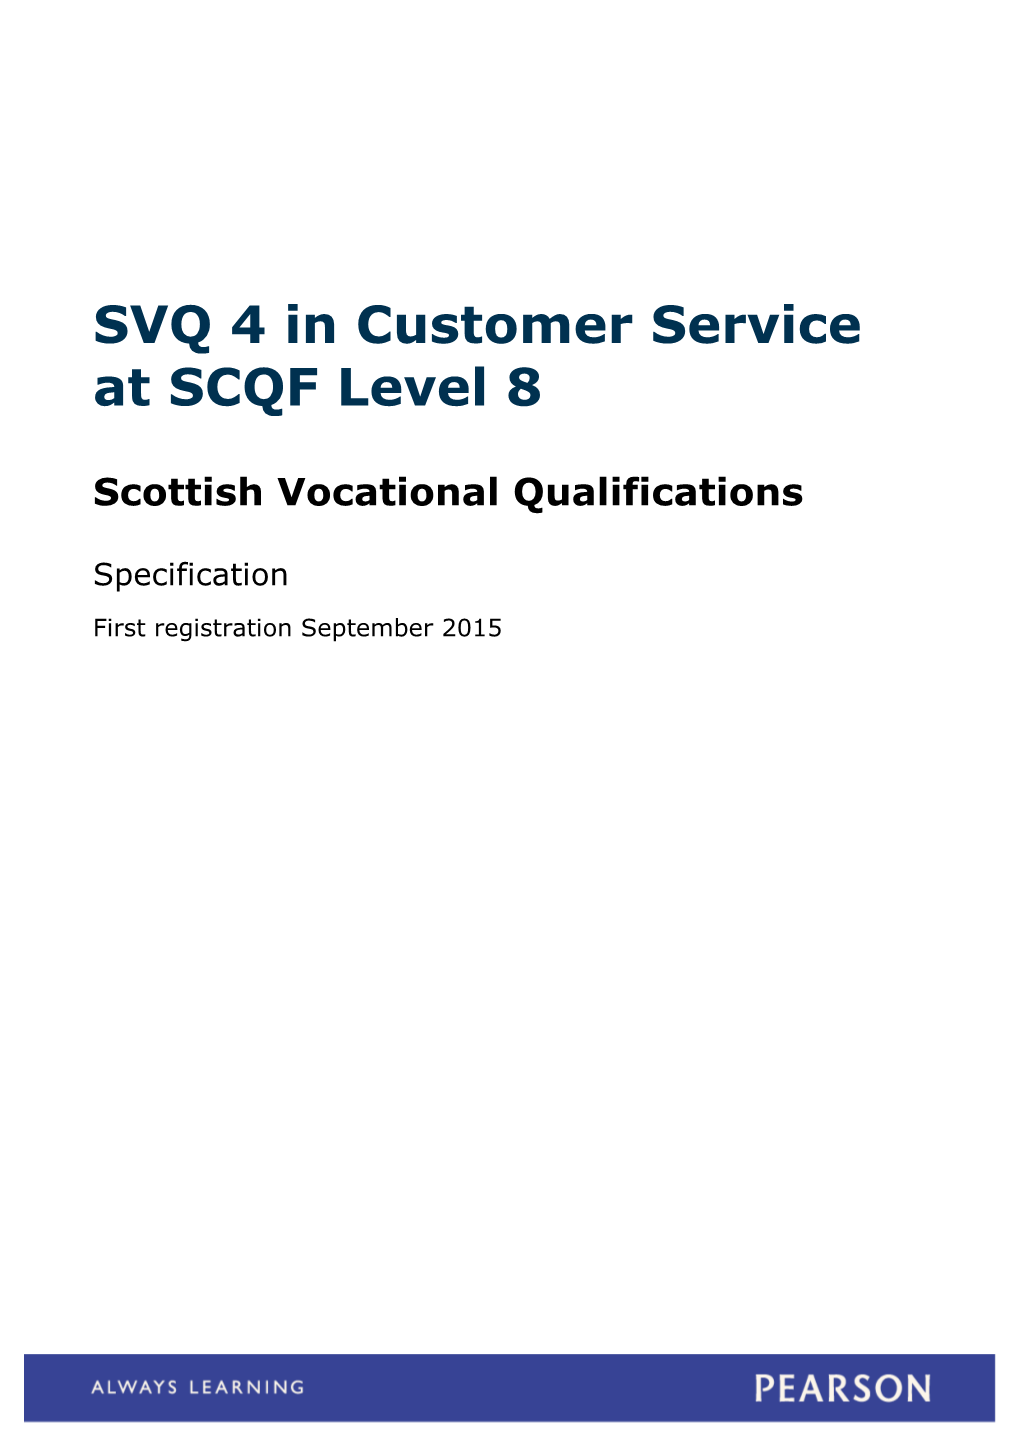 Edexcel NVQ Competence-Based Qualification/S 2014